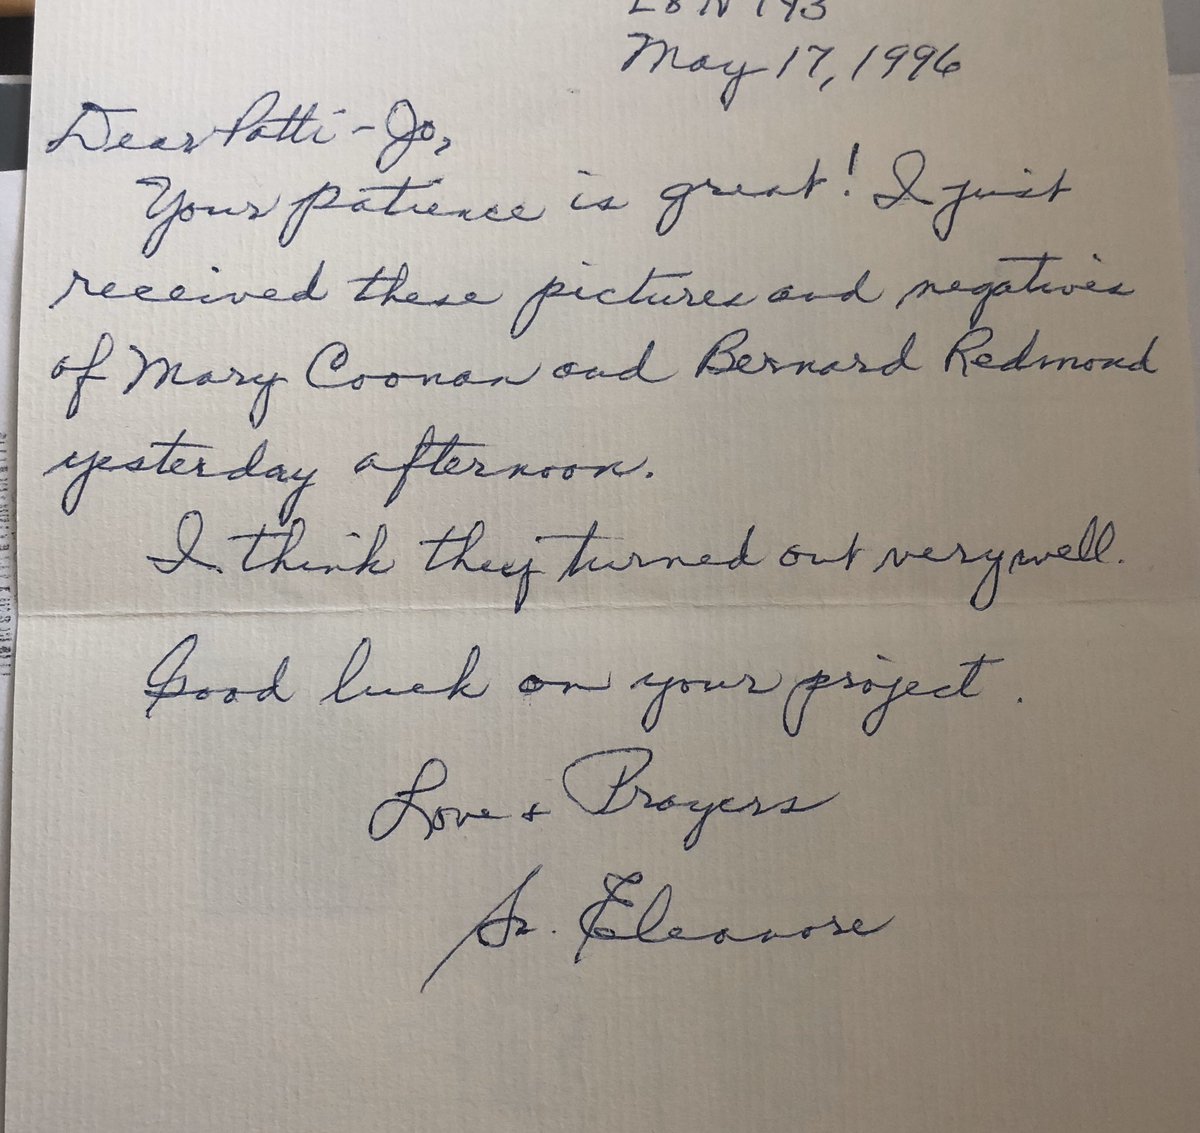 Sr. Eleanore “found”Mary Coonan + Bernard Redmond for me, through perseverance + letter writing to her cousins, one who was especially interested in family histories. She wrote many letters and I’m glad to have kept this one. I loved her very much. This is also her  #matriline 12/